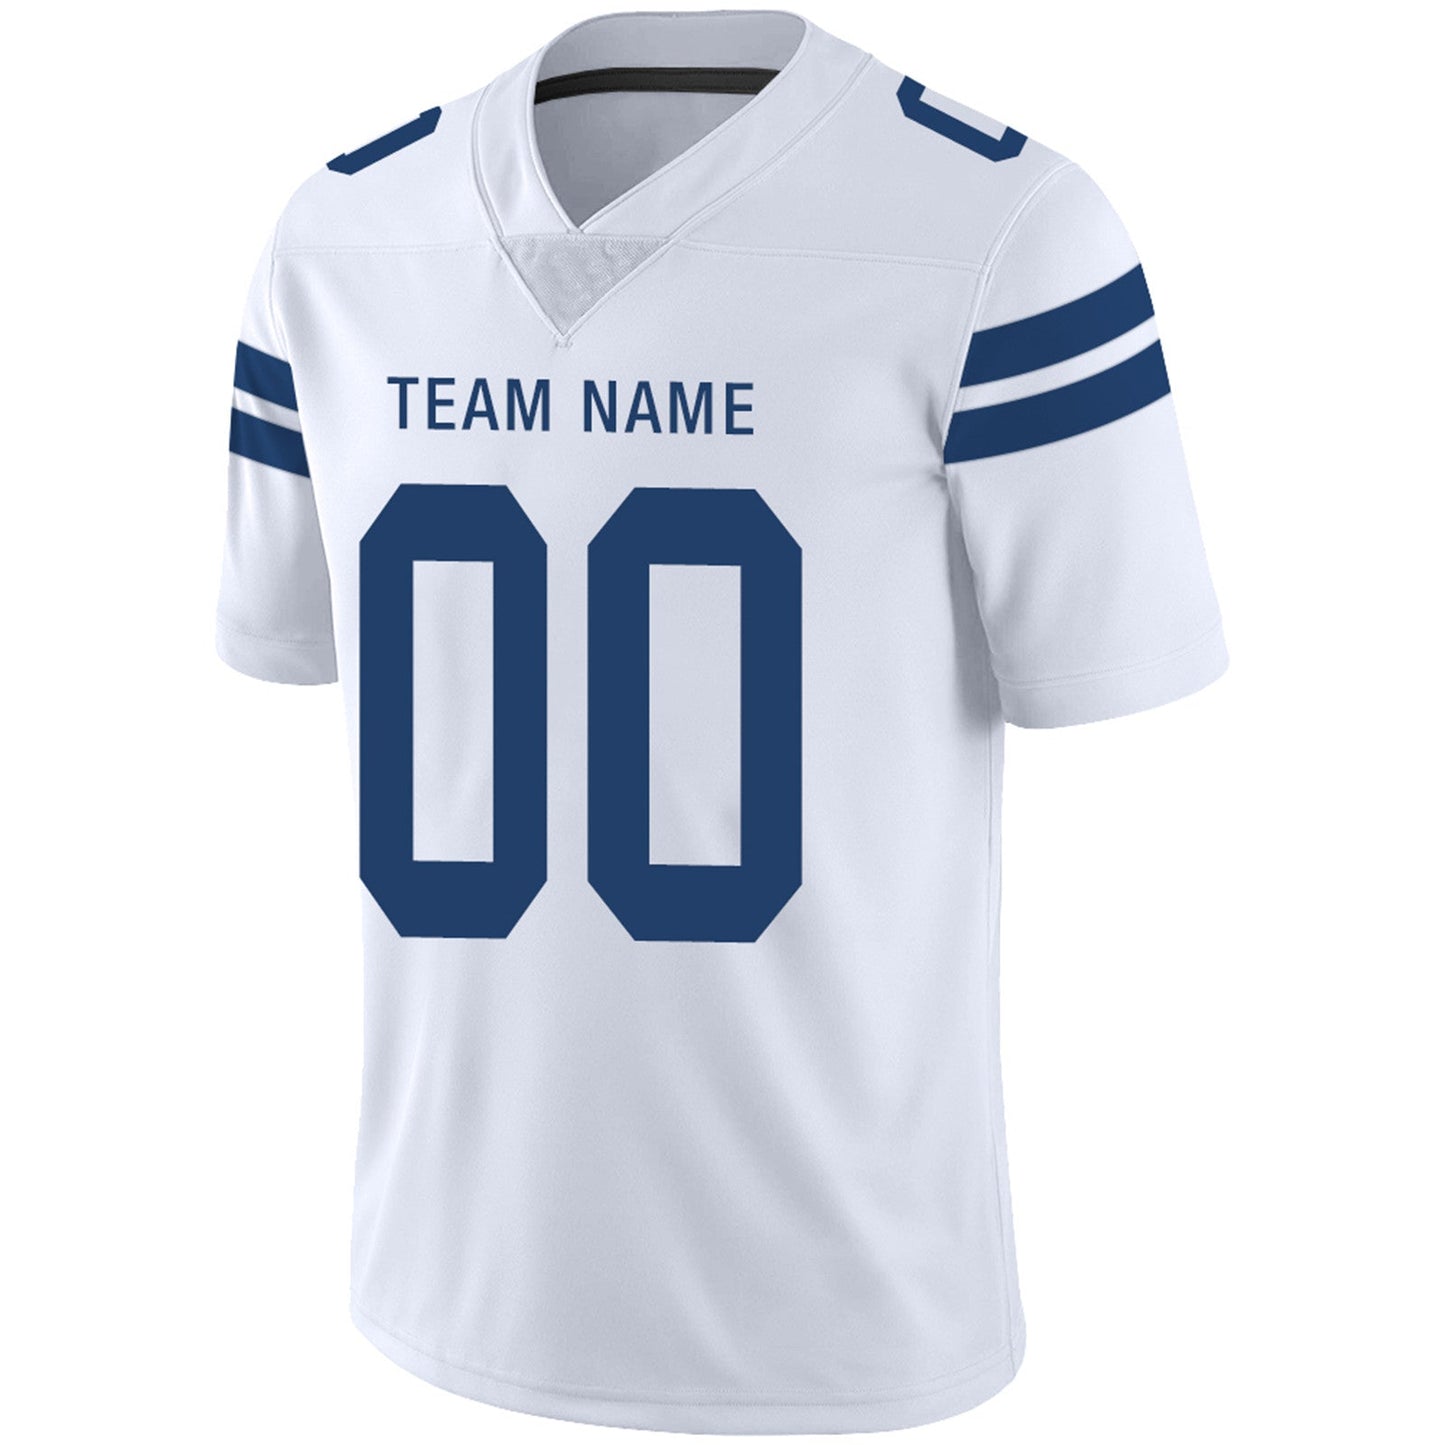 Custom IN.Colts Football Jerseys Team Player or Personalized Design Your Own Name for Men's Women's Youth Jerseys Royal